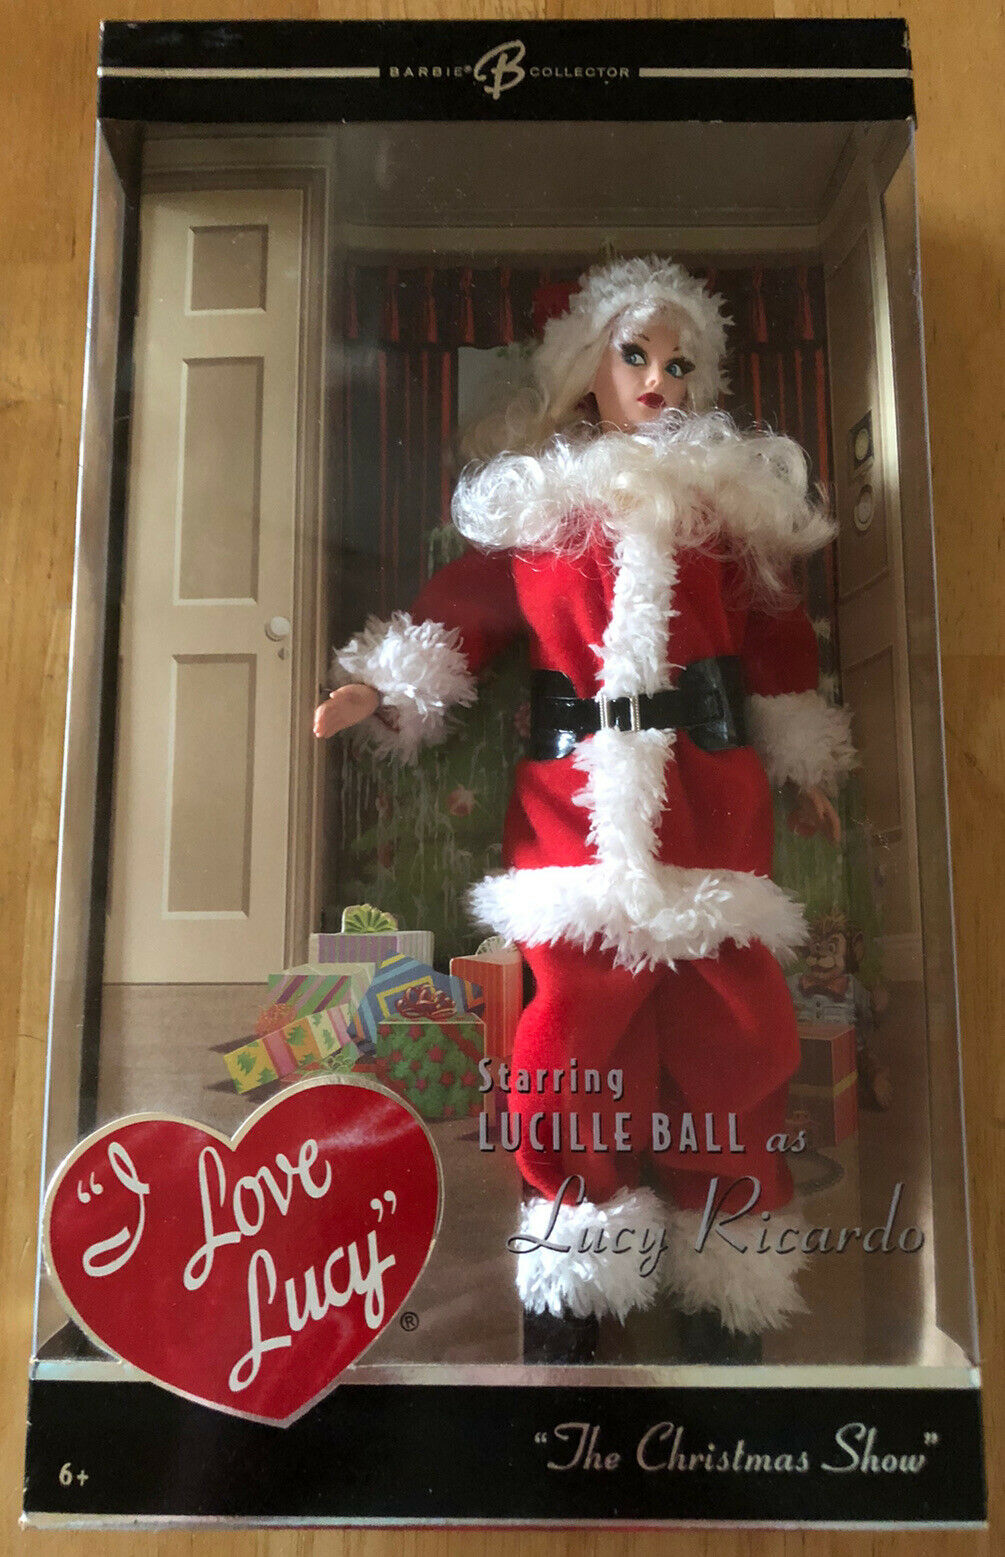 I Love Lucy Barbie Collection “the Christmas Show” Lucy Ricardo As Santa Nrfb